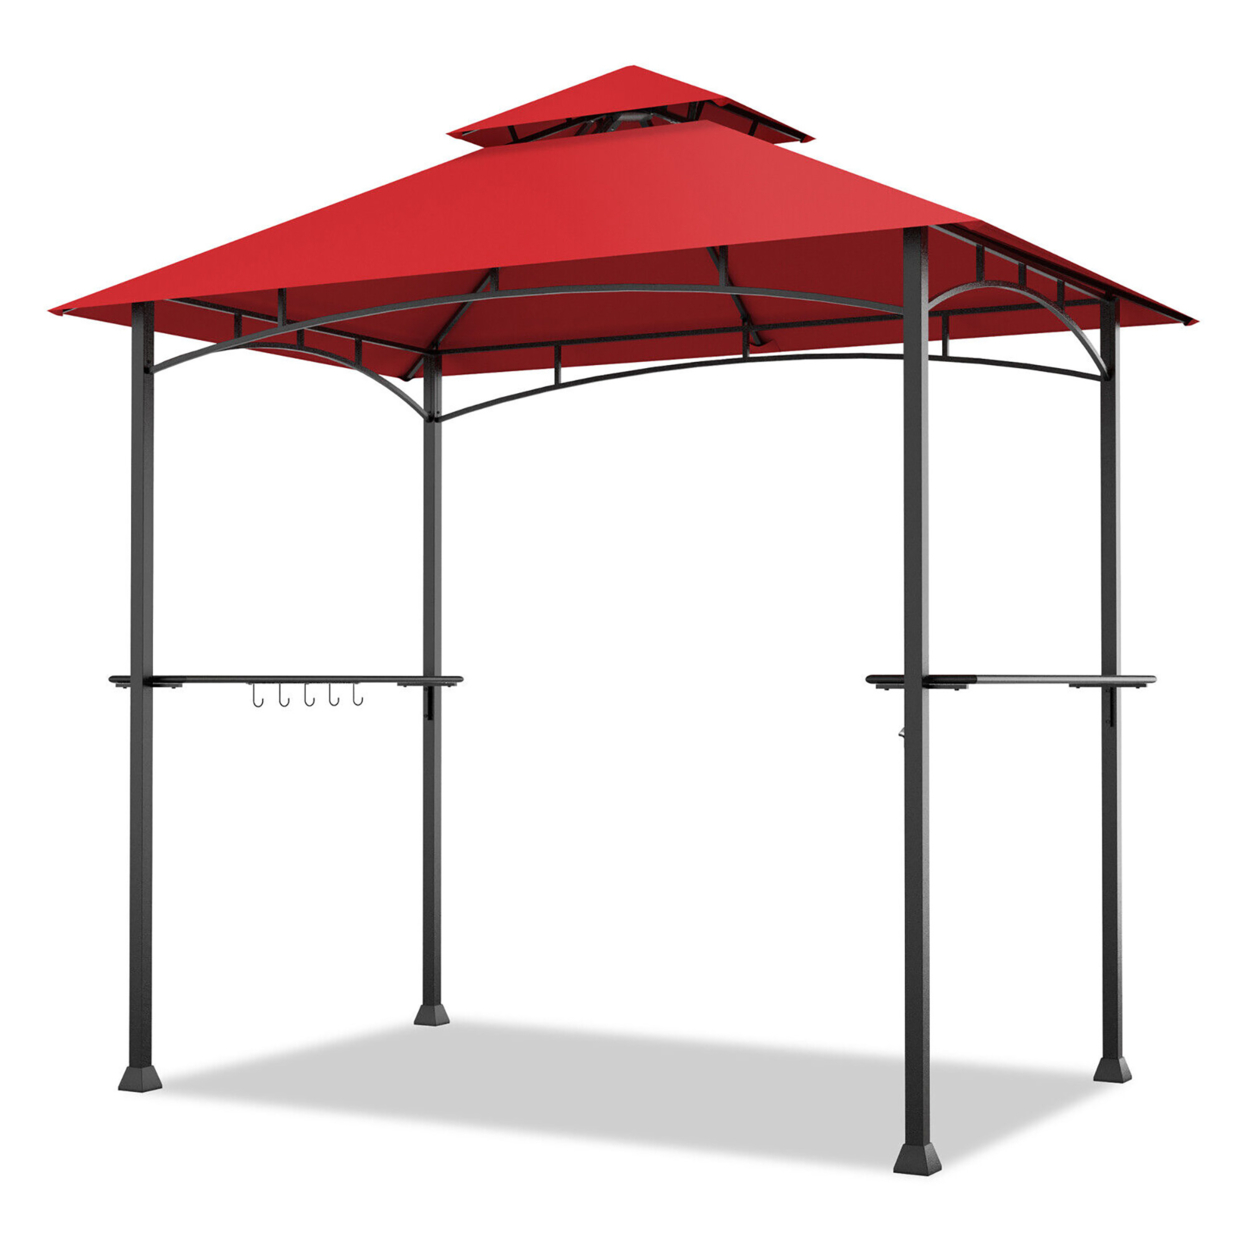 8' X 5' BBQ Grill Gazebo 2-Tier Barbecue Canopy Vented Top Shelves Shelter - Wine